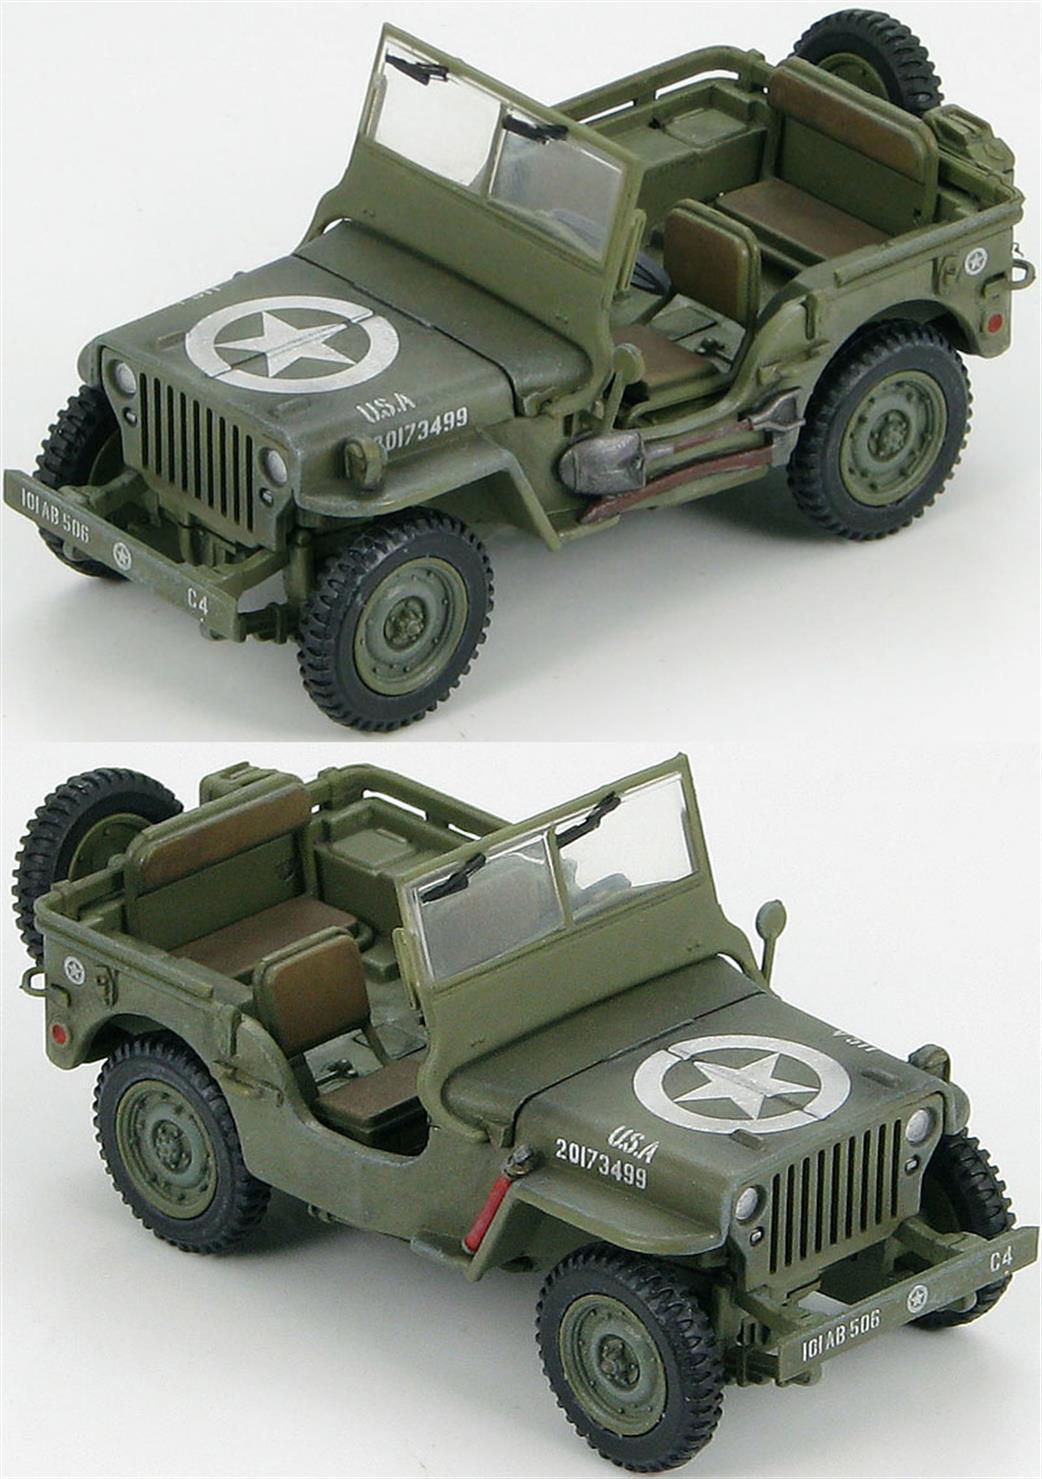 Hobby Master 1/48 HG1601 US Willys Jeep 101st Airborne iv., 506th A.B. Regiment, Company `C`, Normandy, 6 June 1944